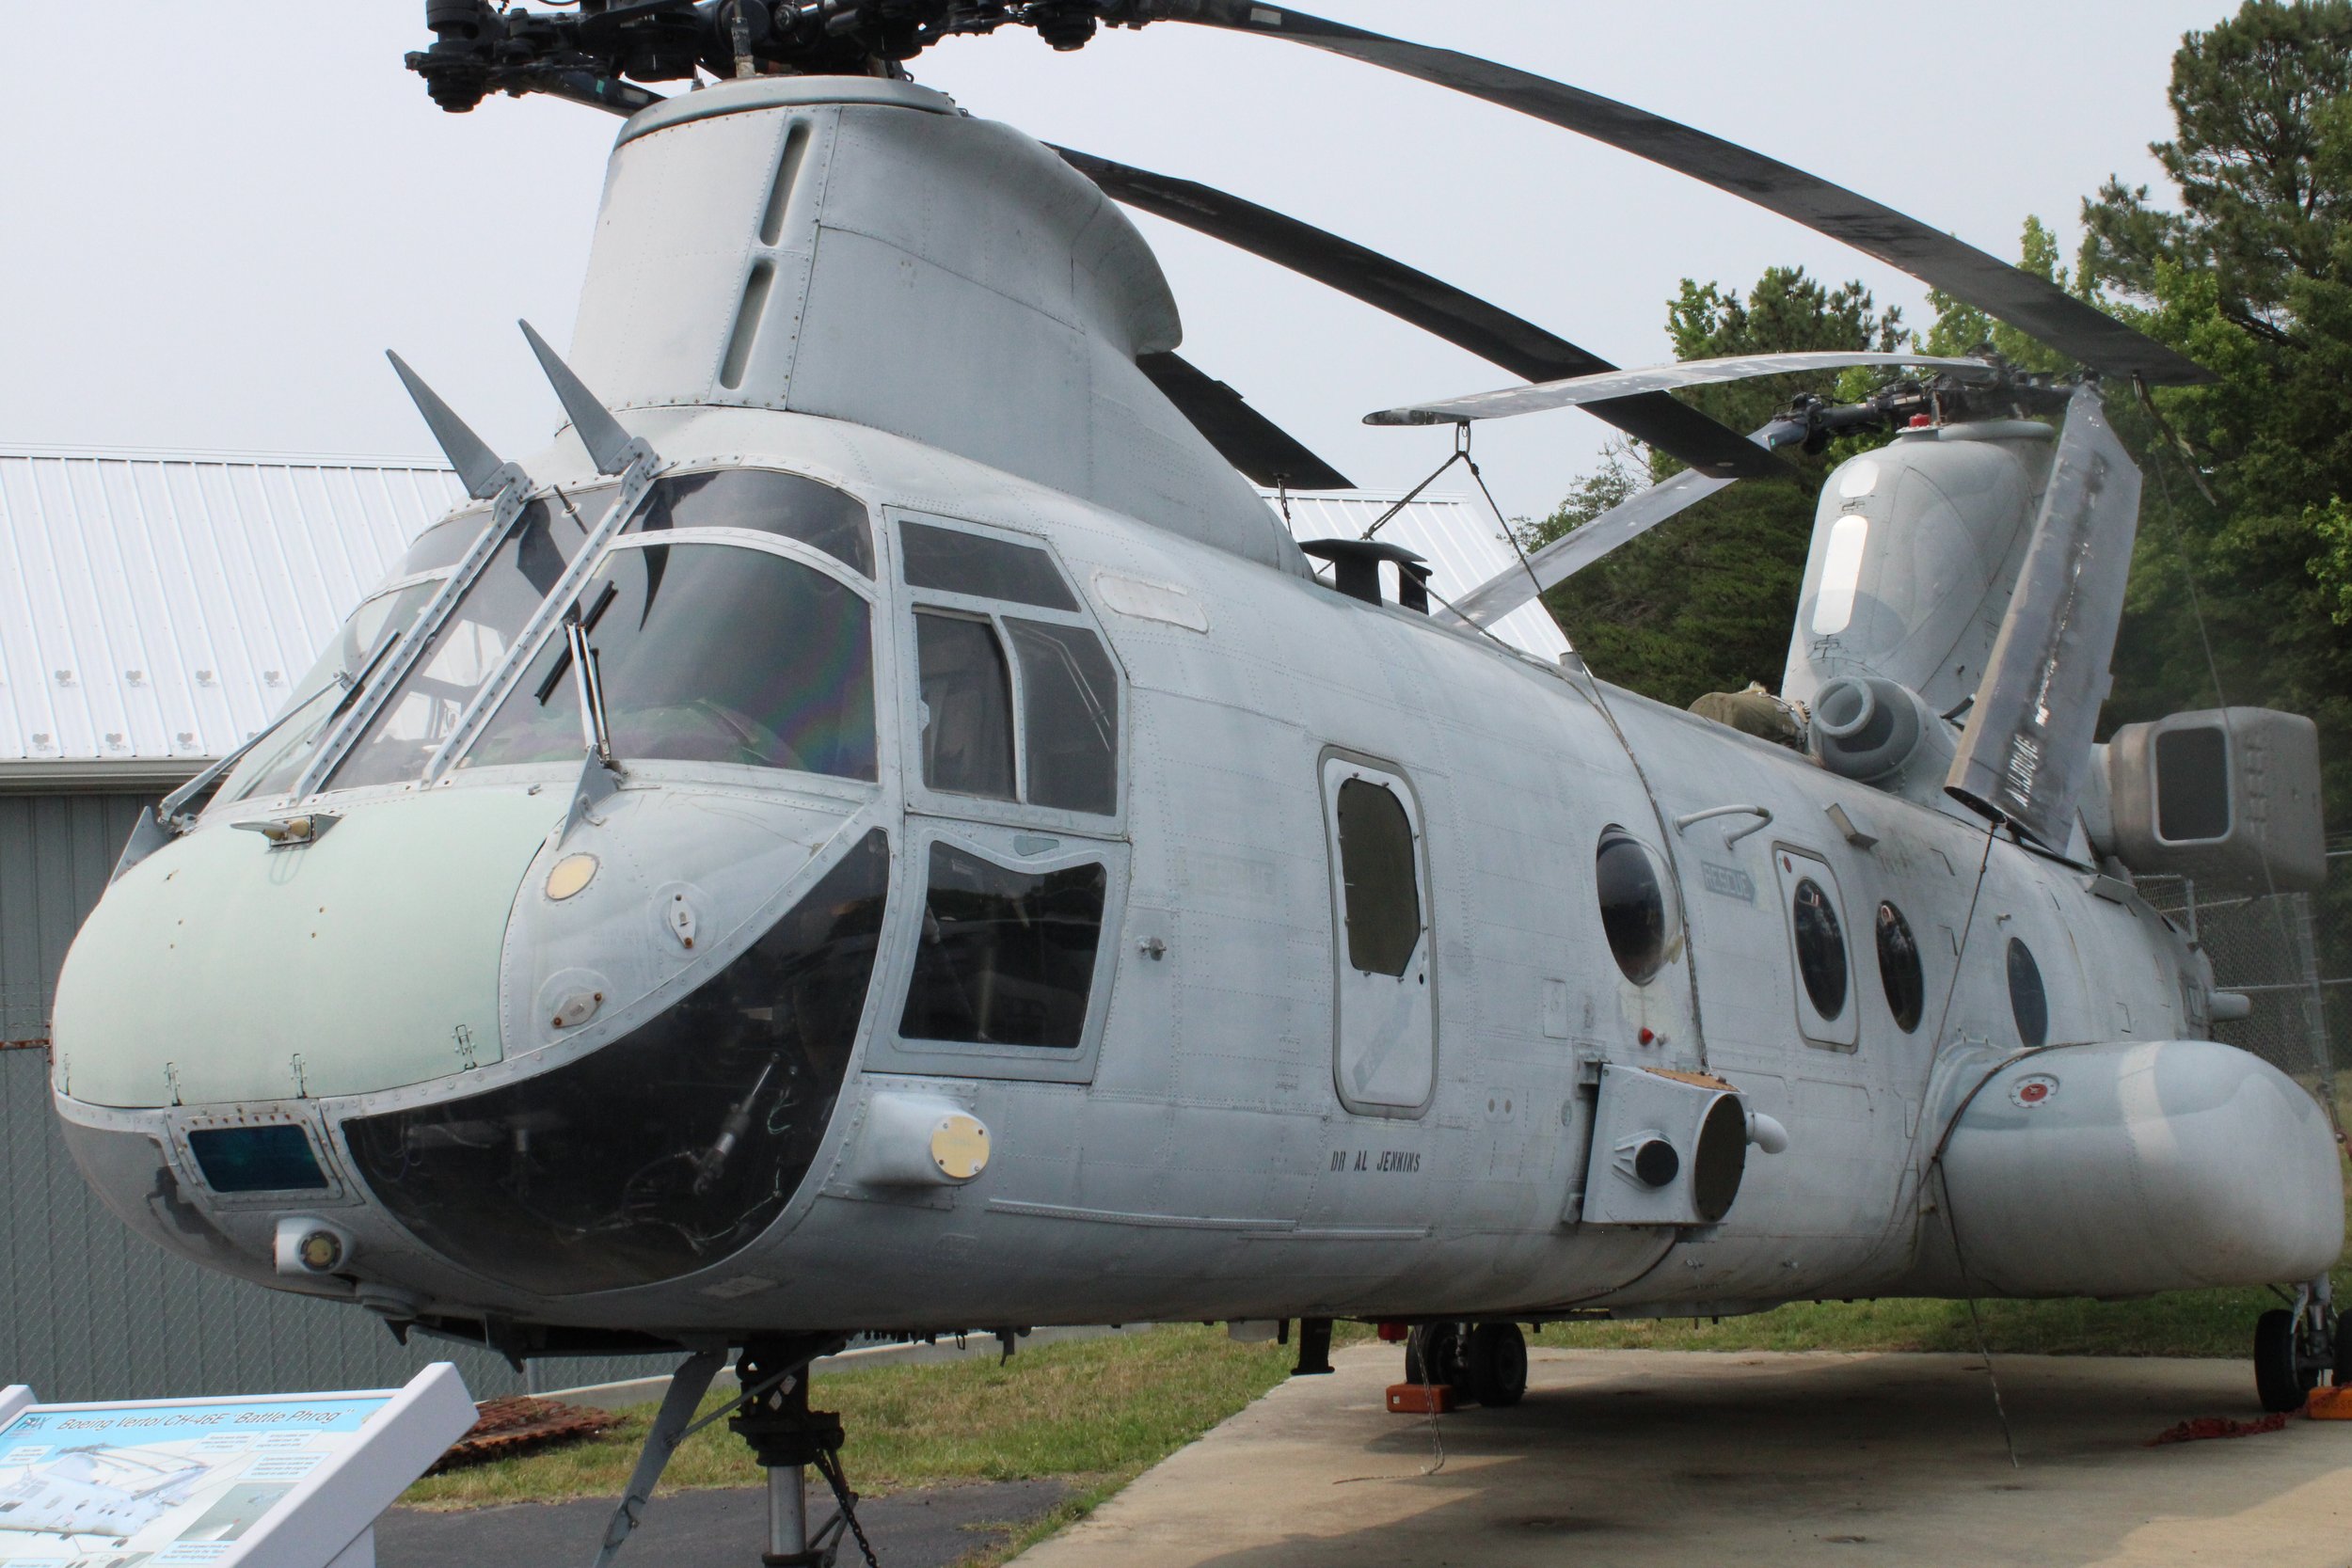 Gallery 2 — Patuxent River Naval Air Museum